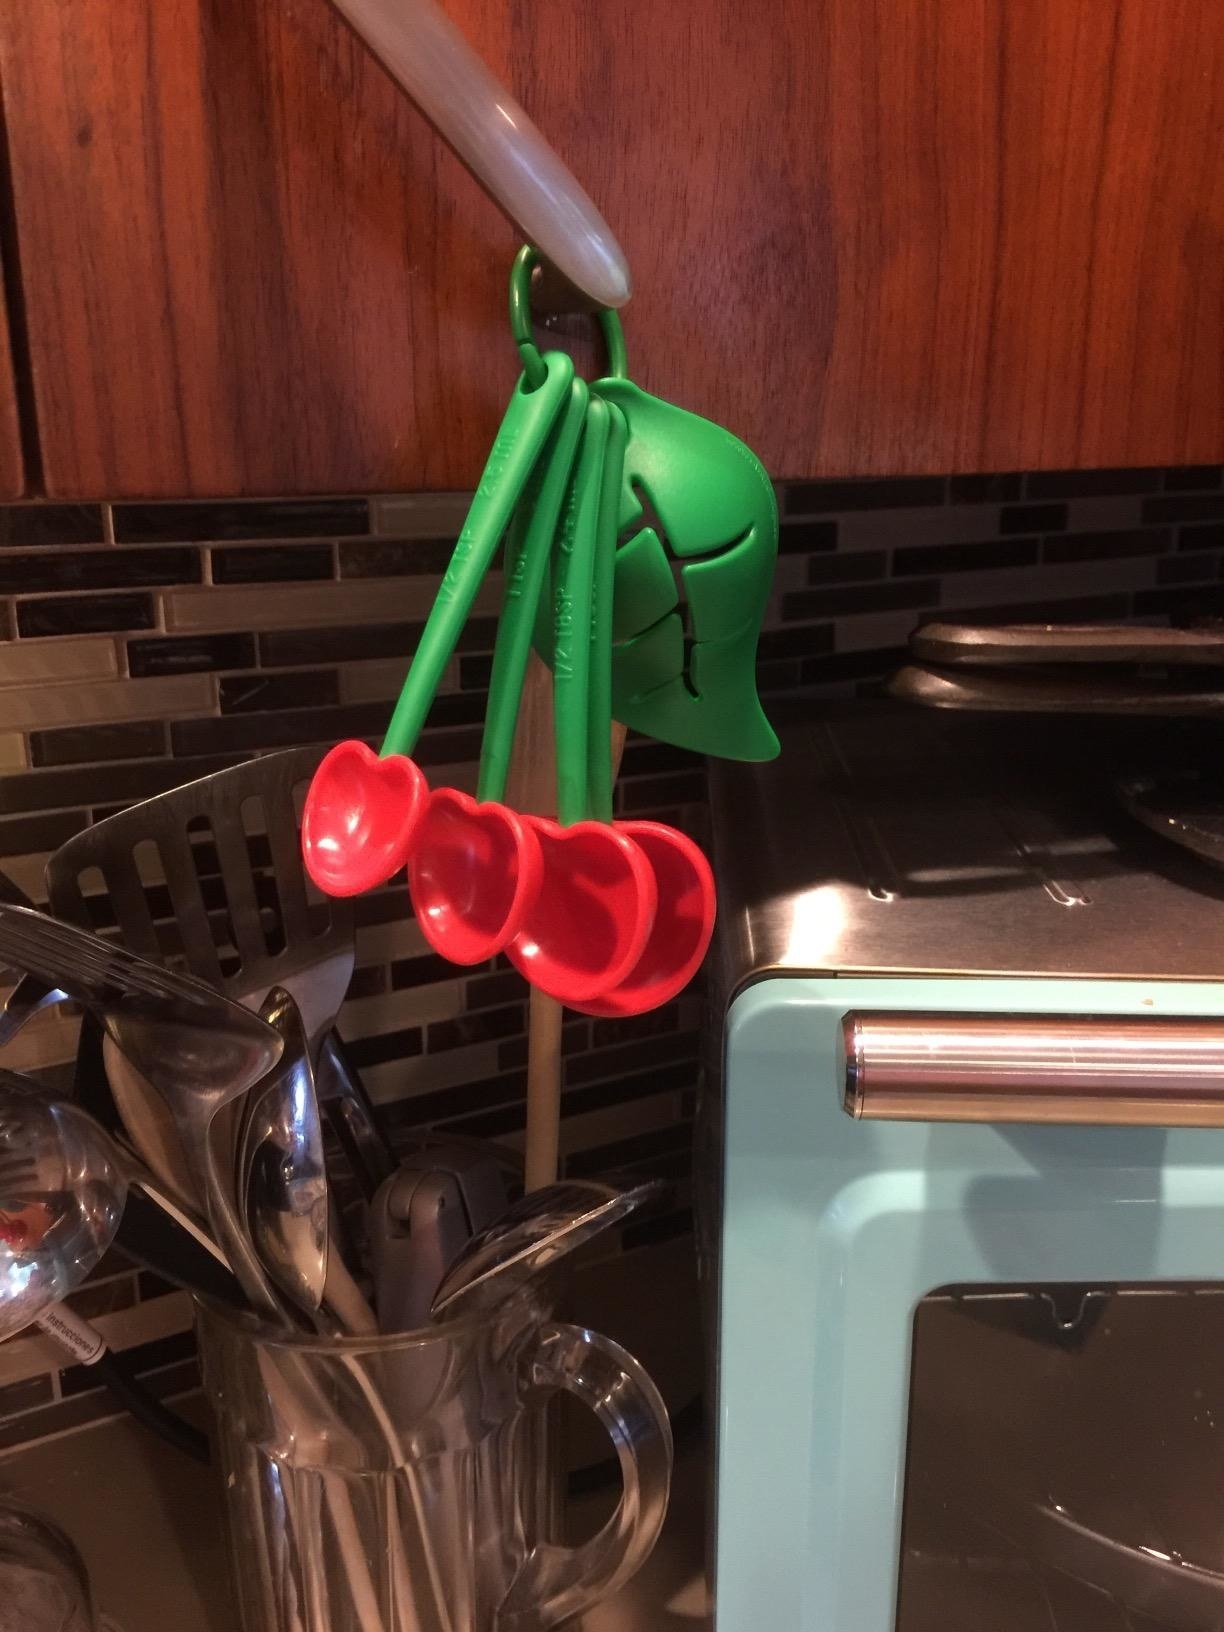 A reviewer photo of the measuring spoons, which have red, heart-shaped spoon surfaces and green handles